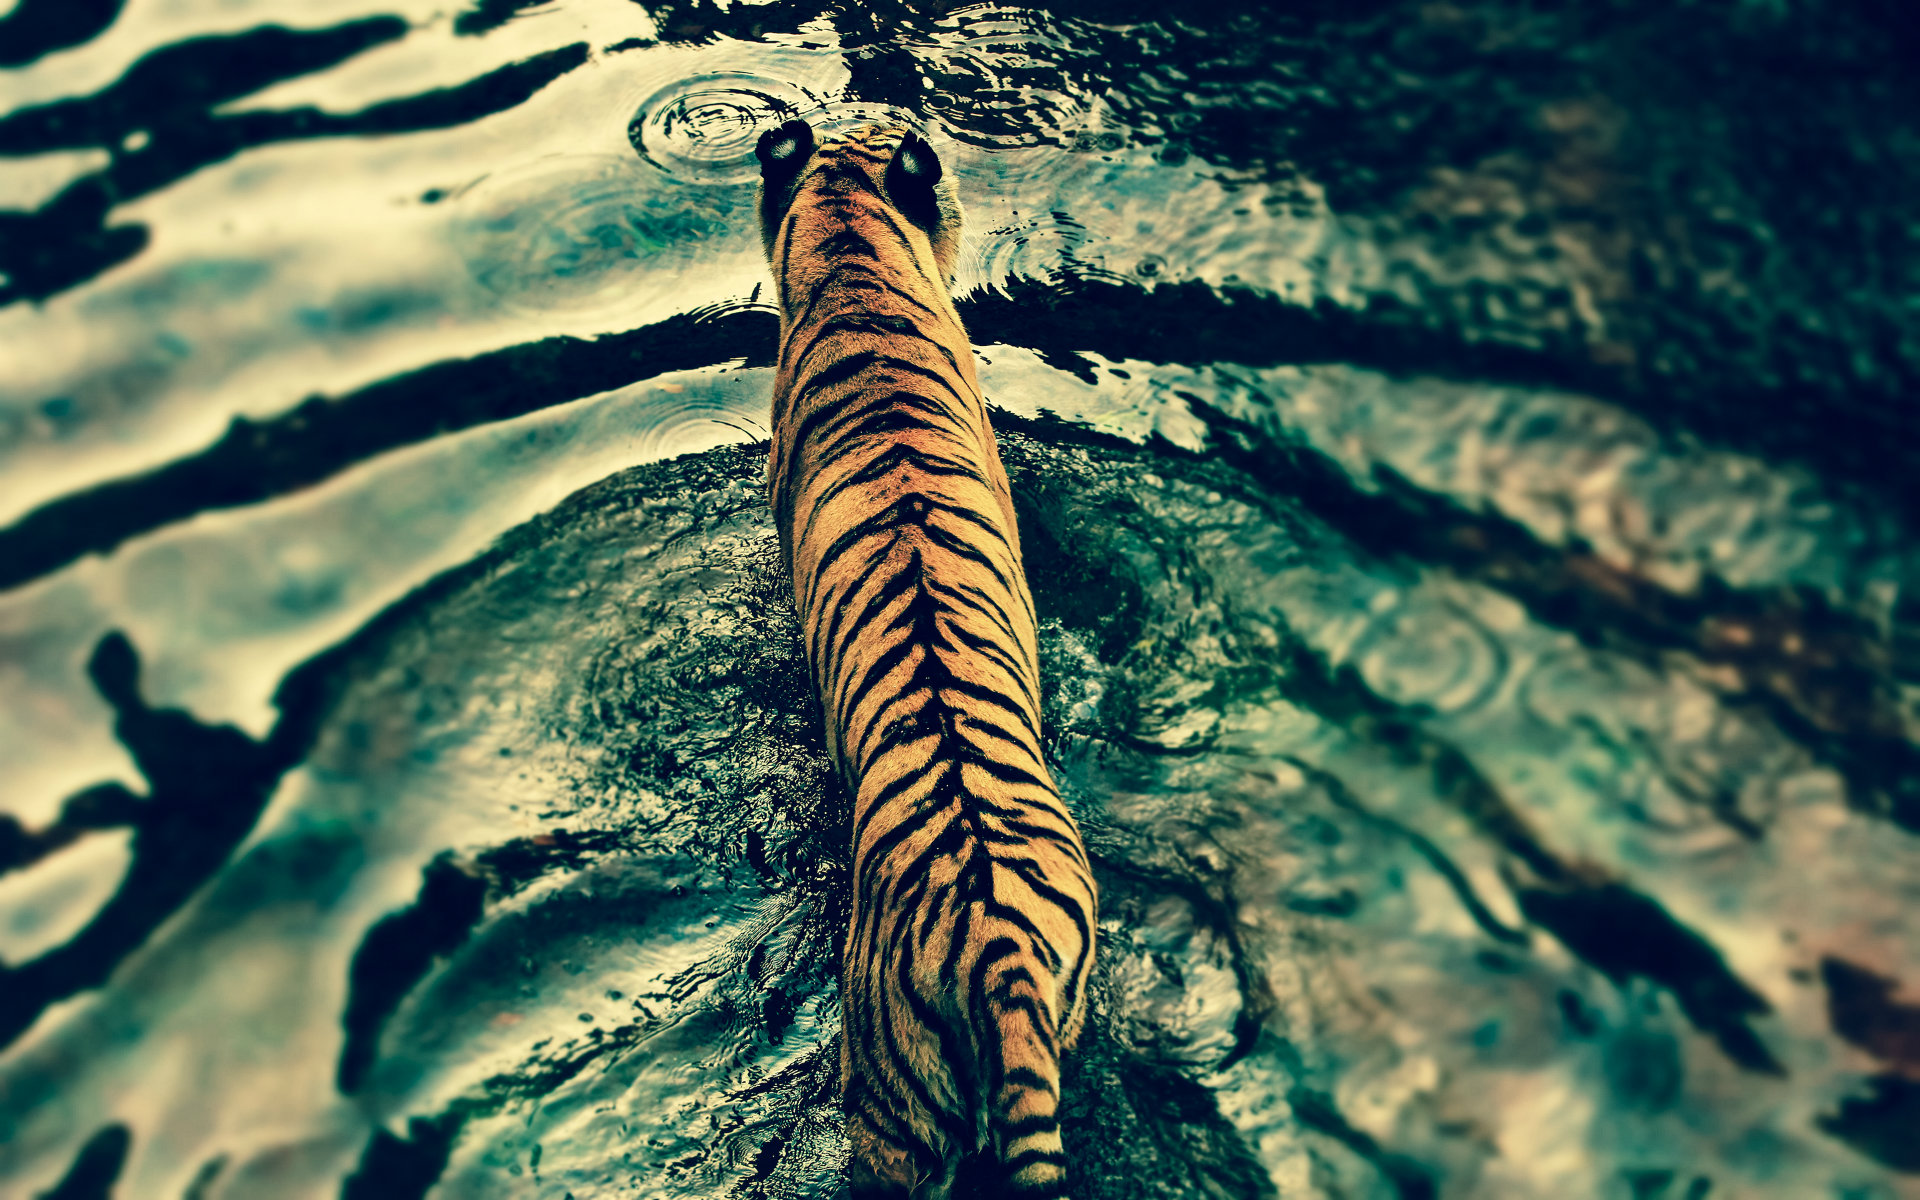 Tiger HD Wallpaper Pictures 1080p